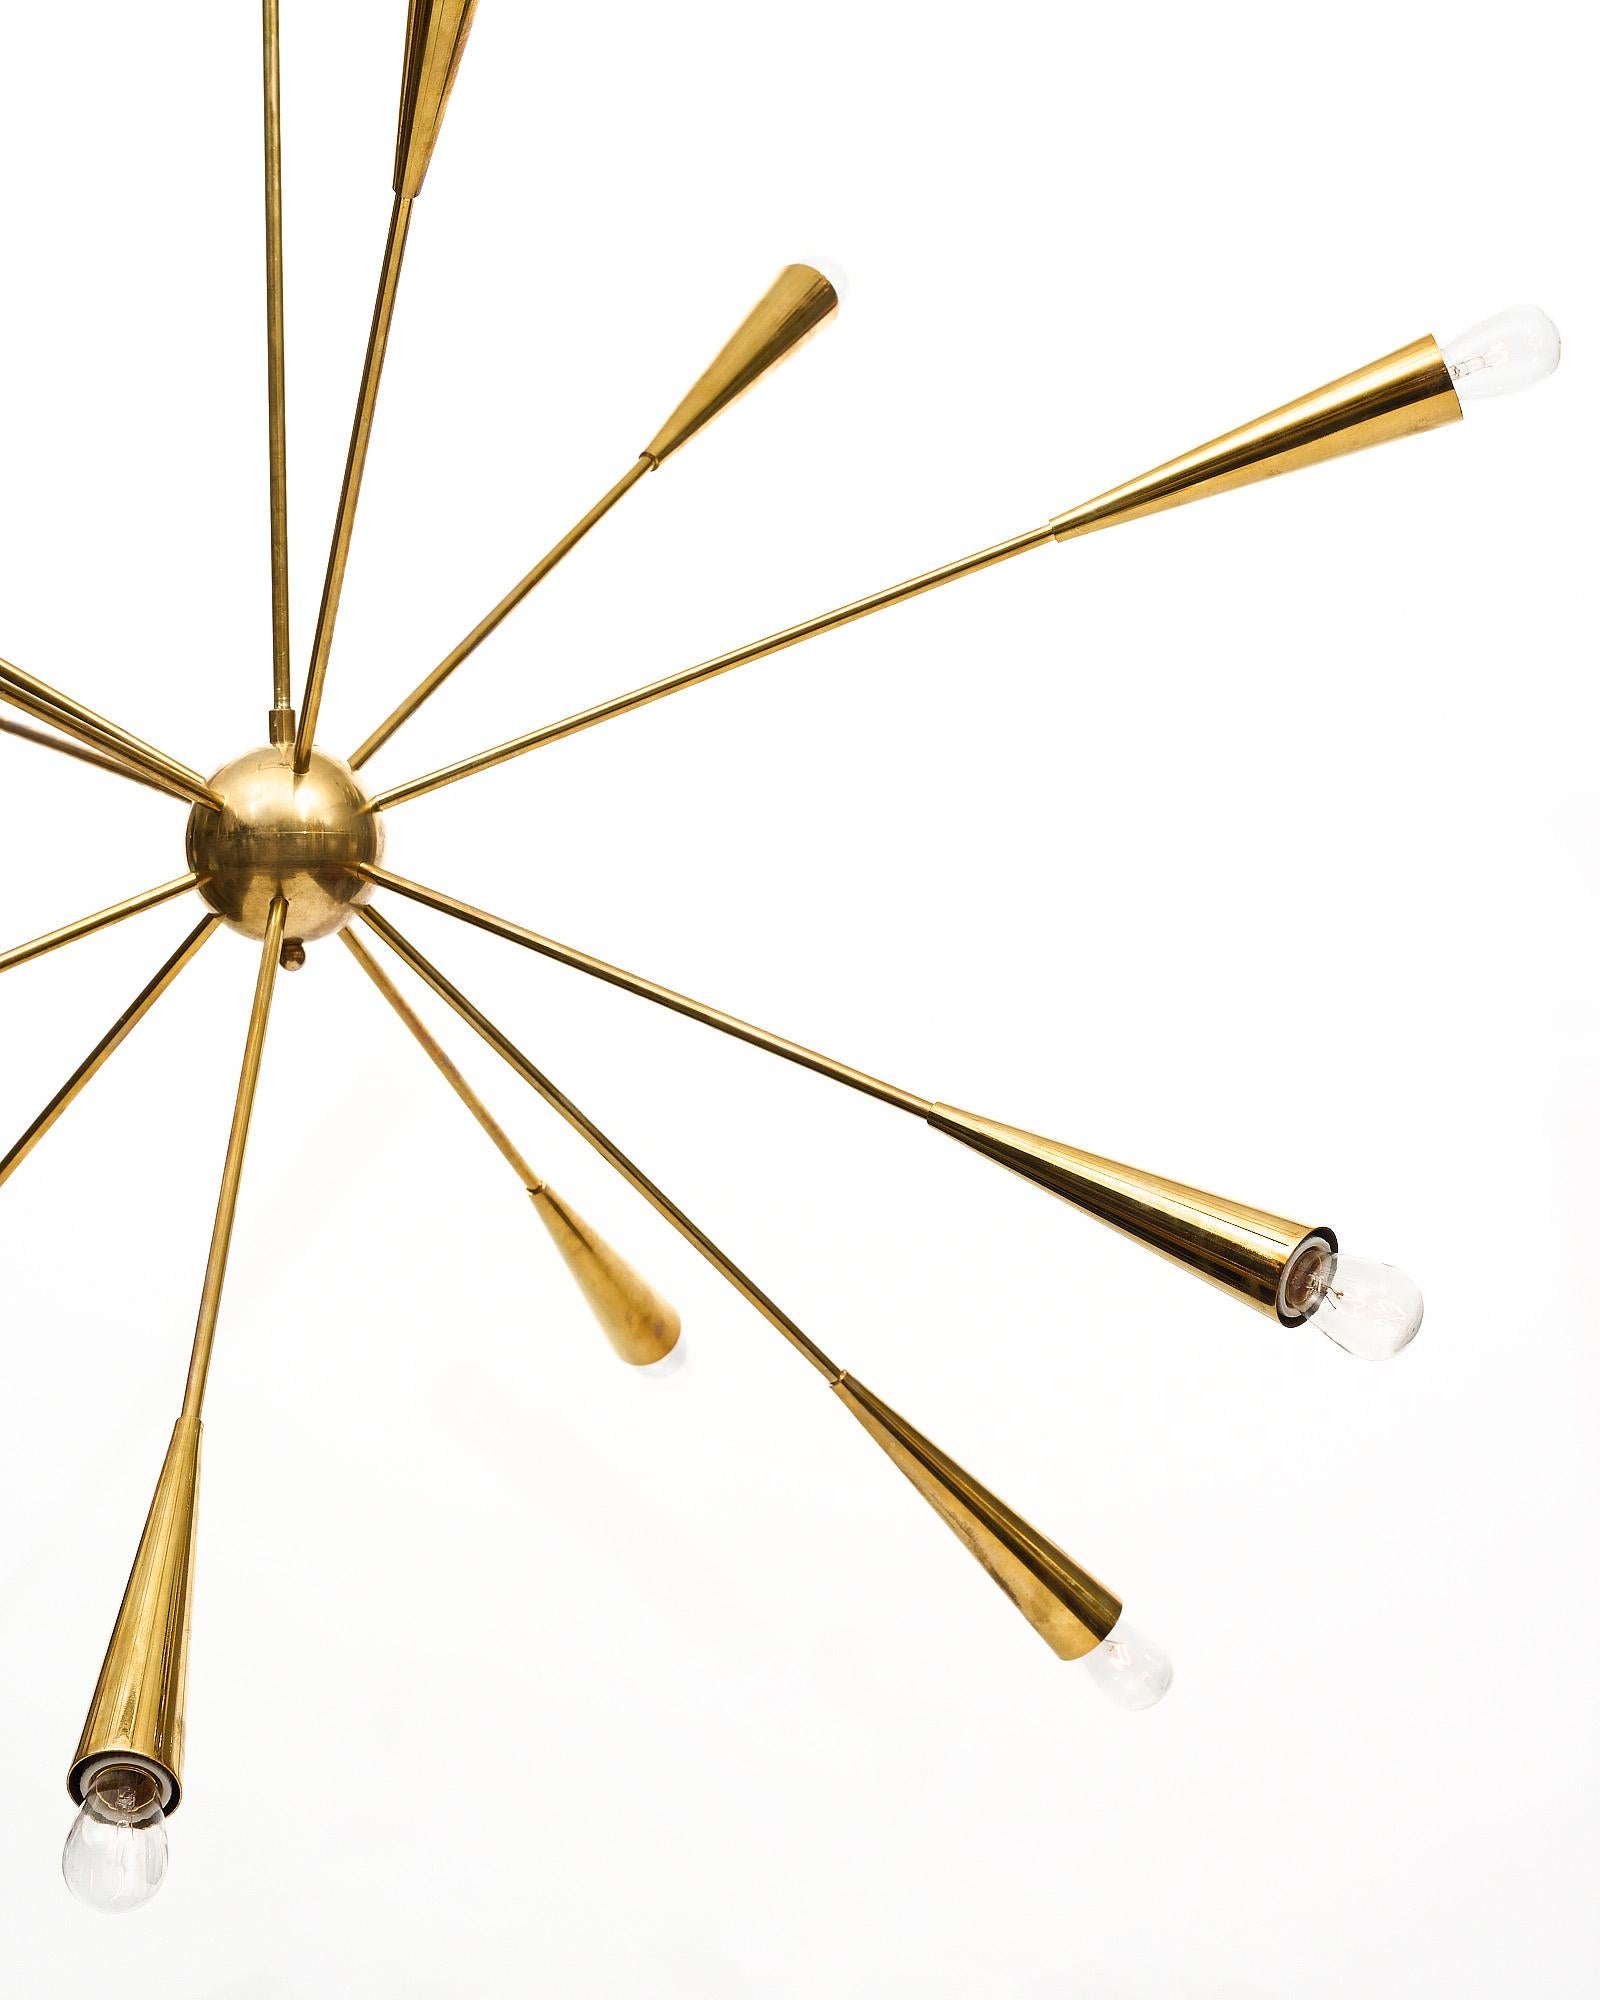 Sputnik chandelier from Italy made of brass. There are twelve arms erupting from a central brass globe finishing with a conic design. Each arm is lit from the end and has been newly wired to fit US standards.